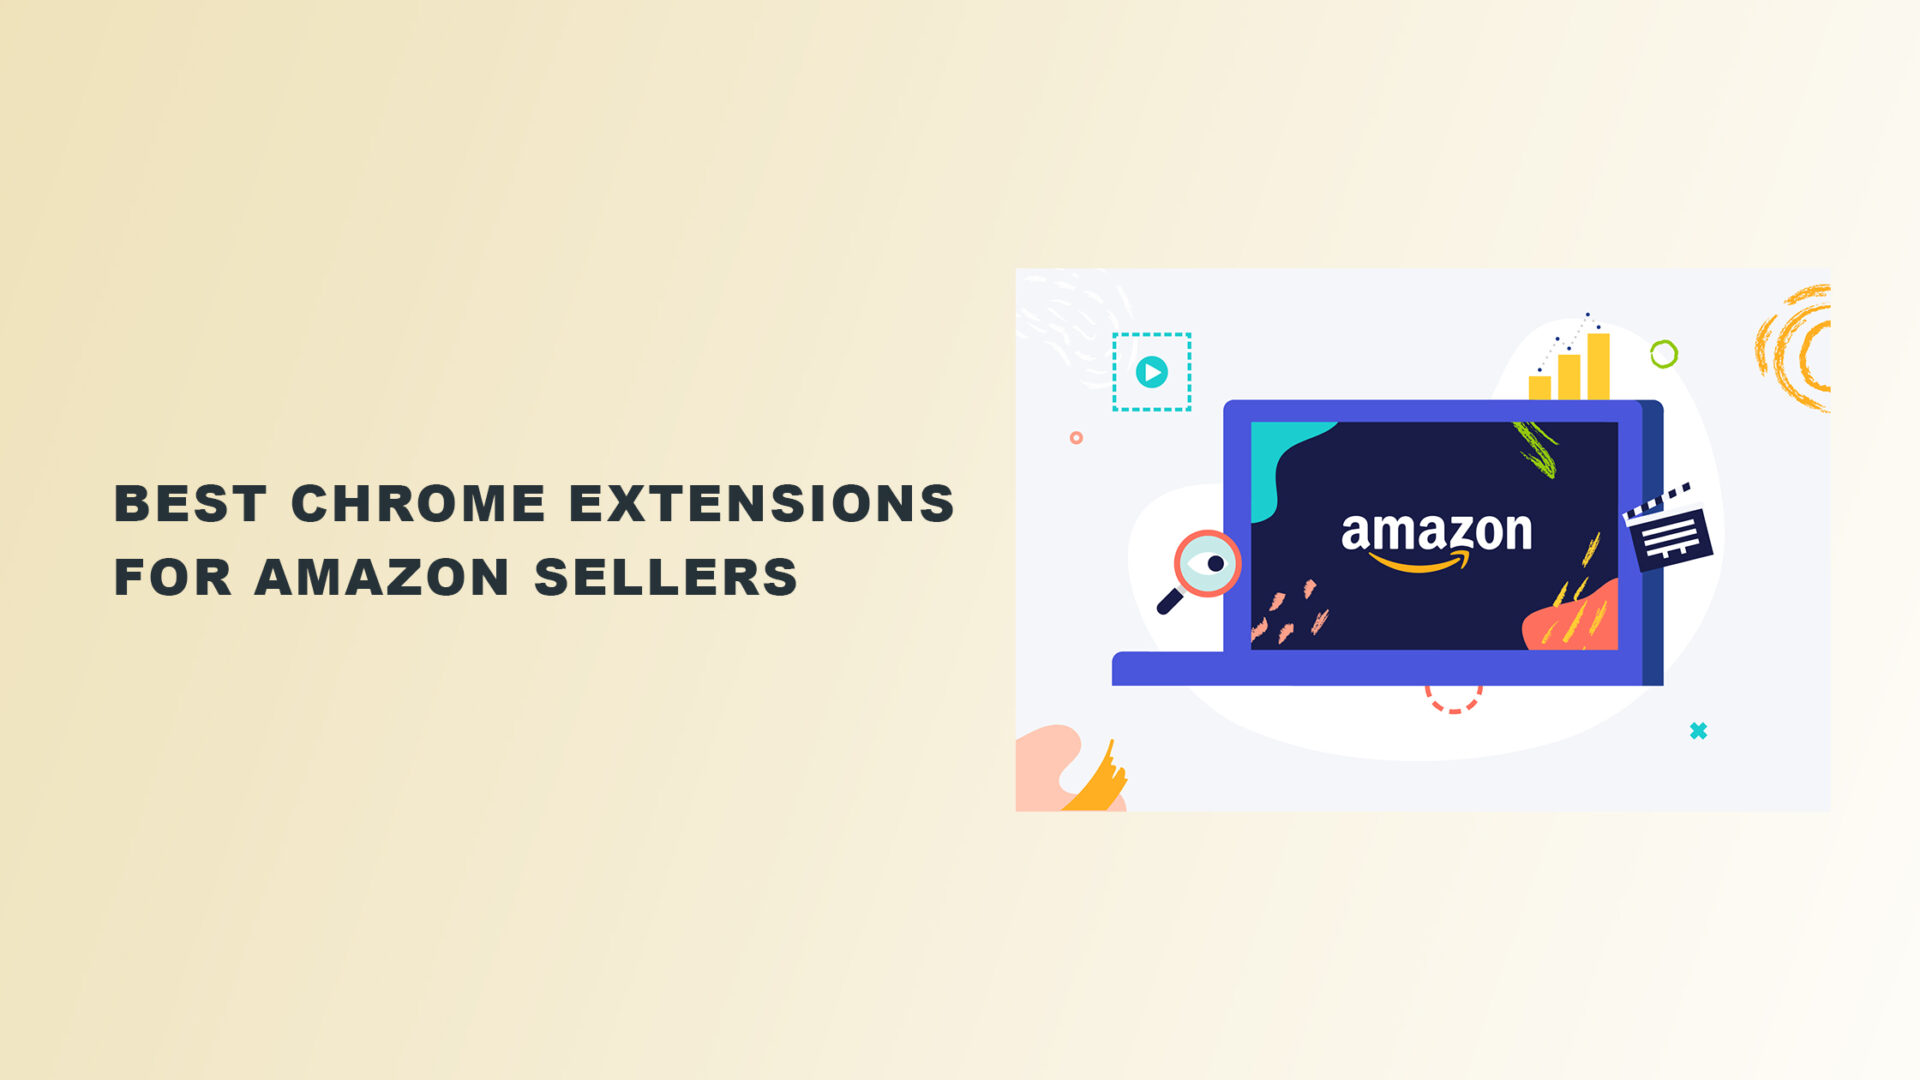 Best Chrome Extensions for Amazon Sellers